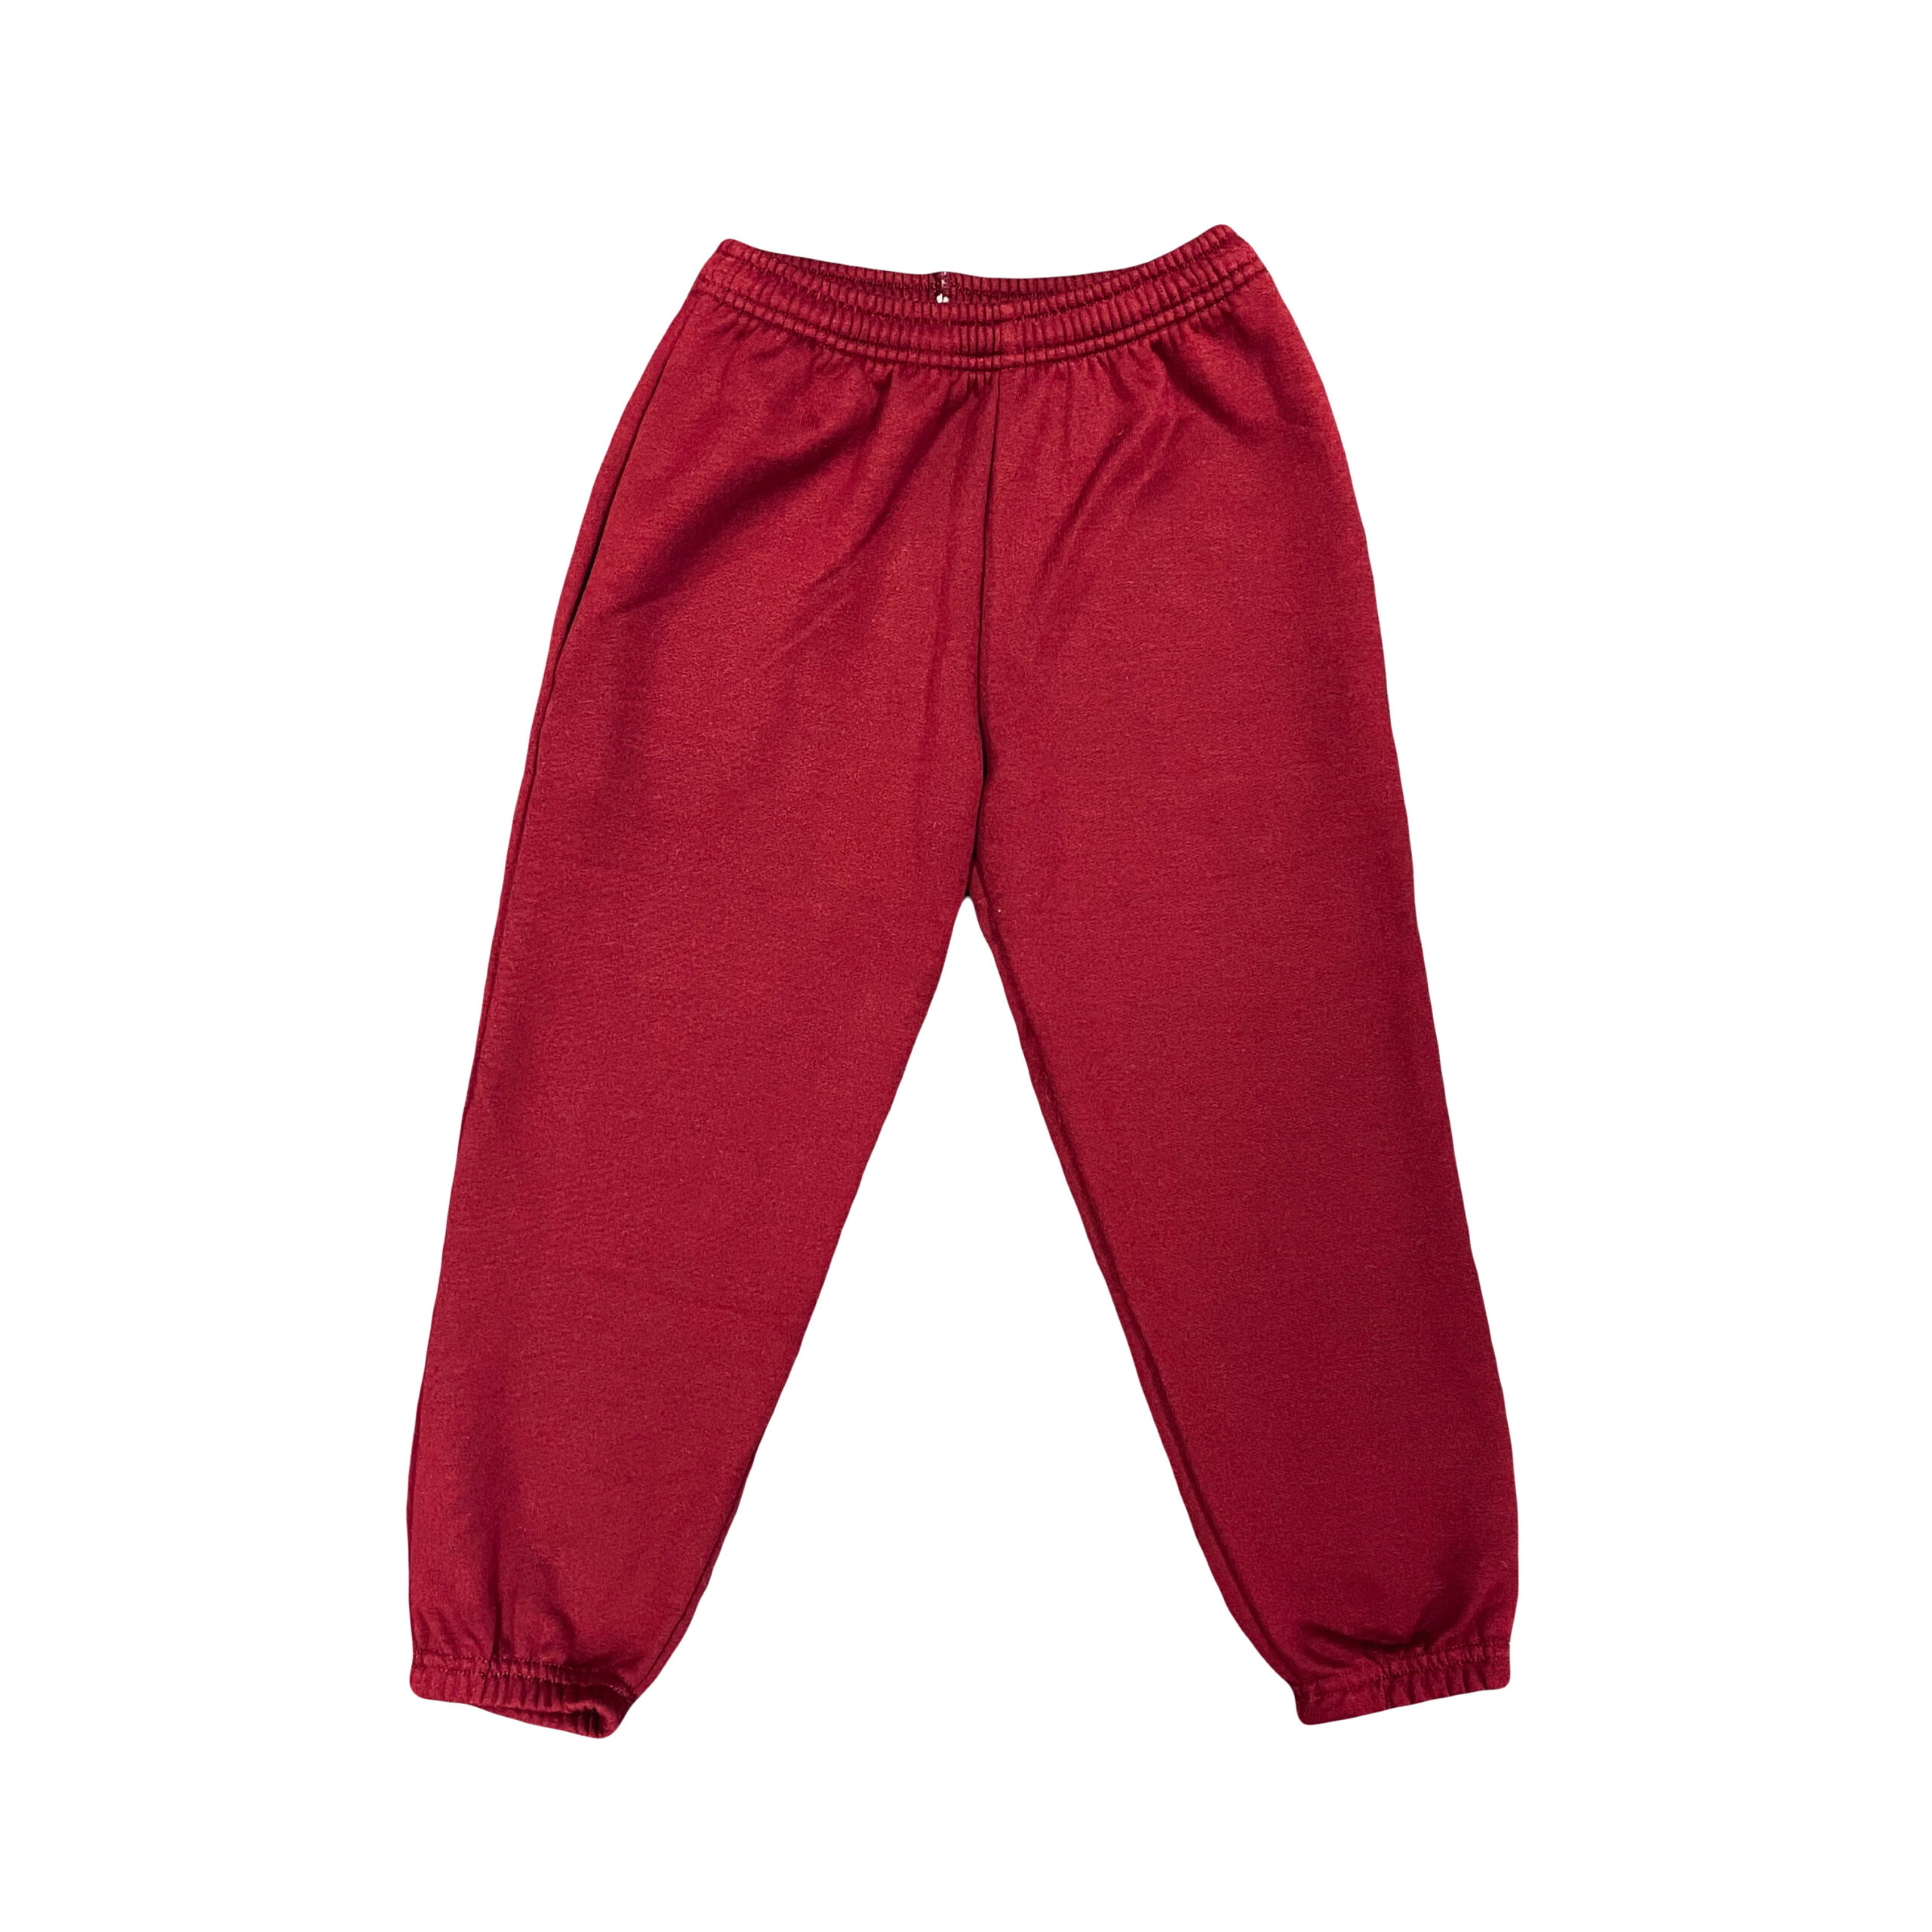 Westmeads Infant School Joggers